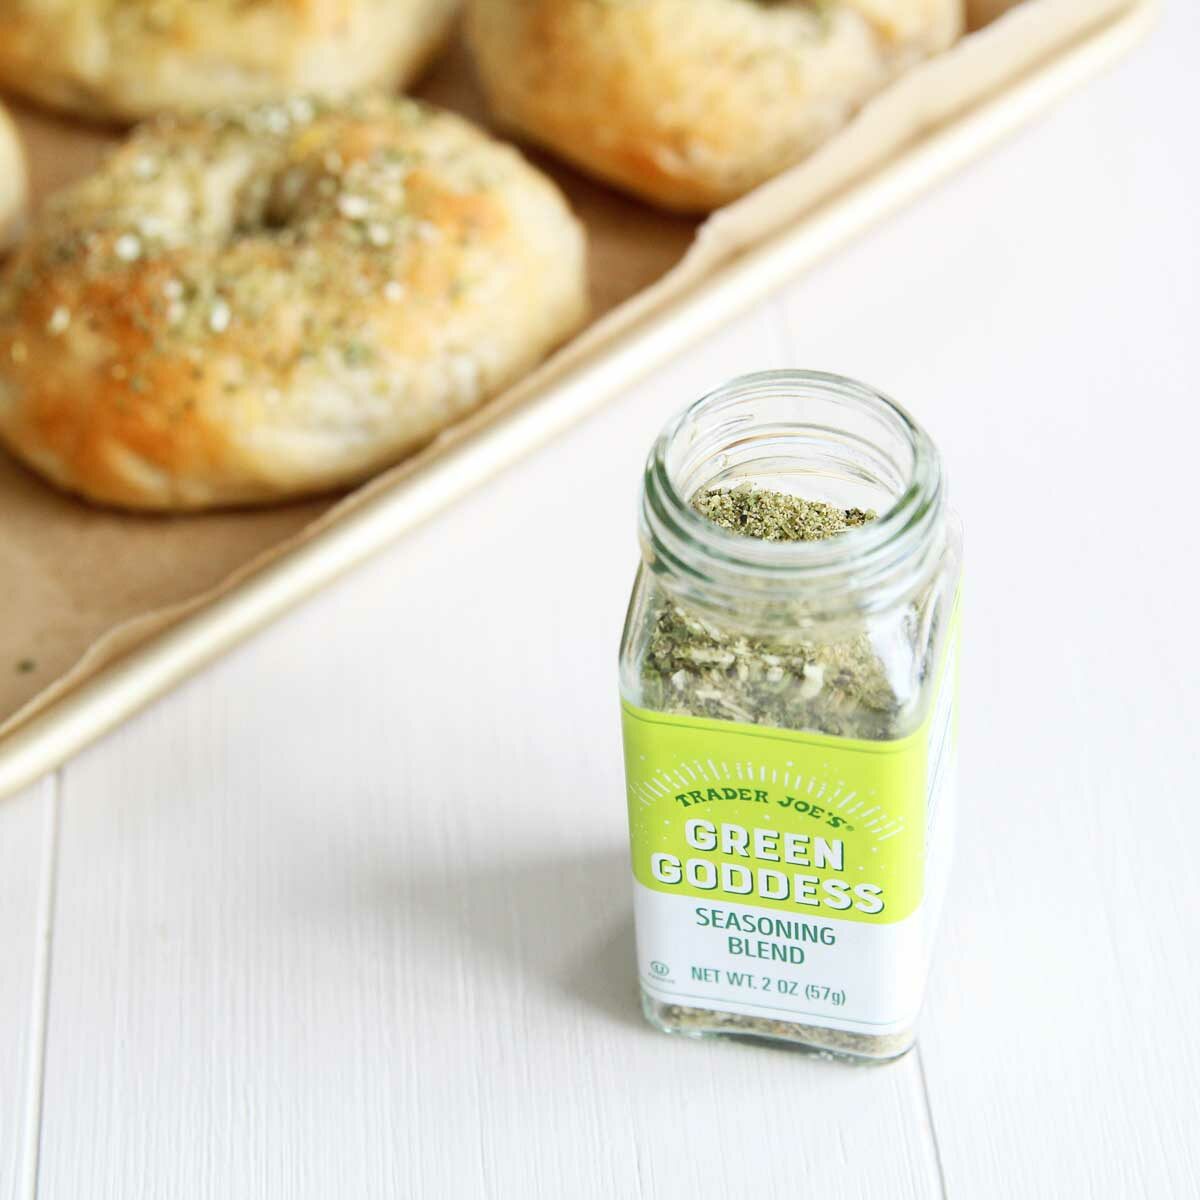 Dried herbs or a green seasoning mix such as Trader Joes Green Goddess Blend for bagel topping